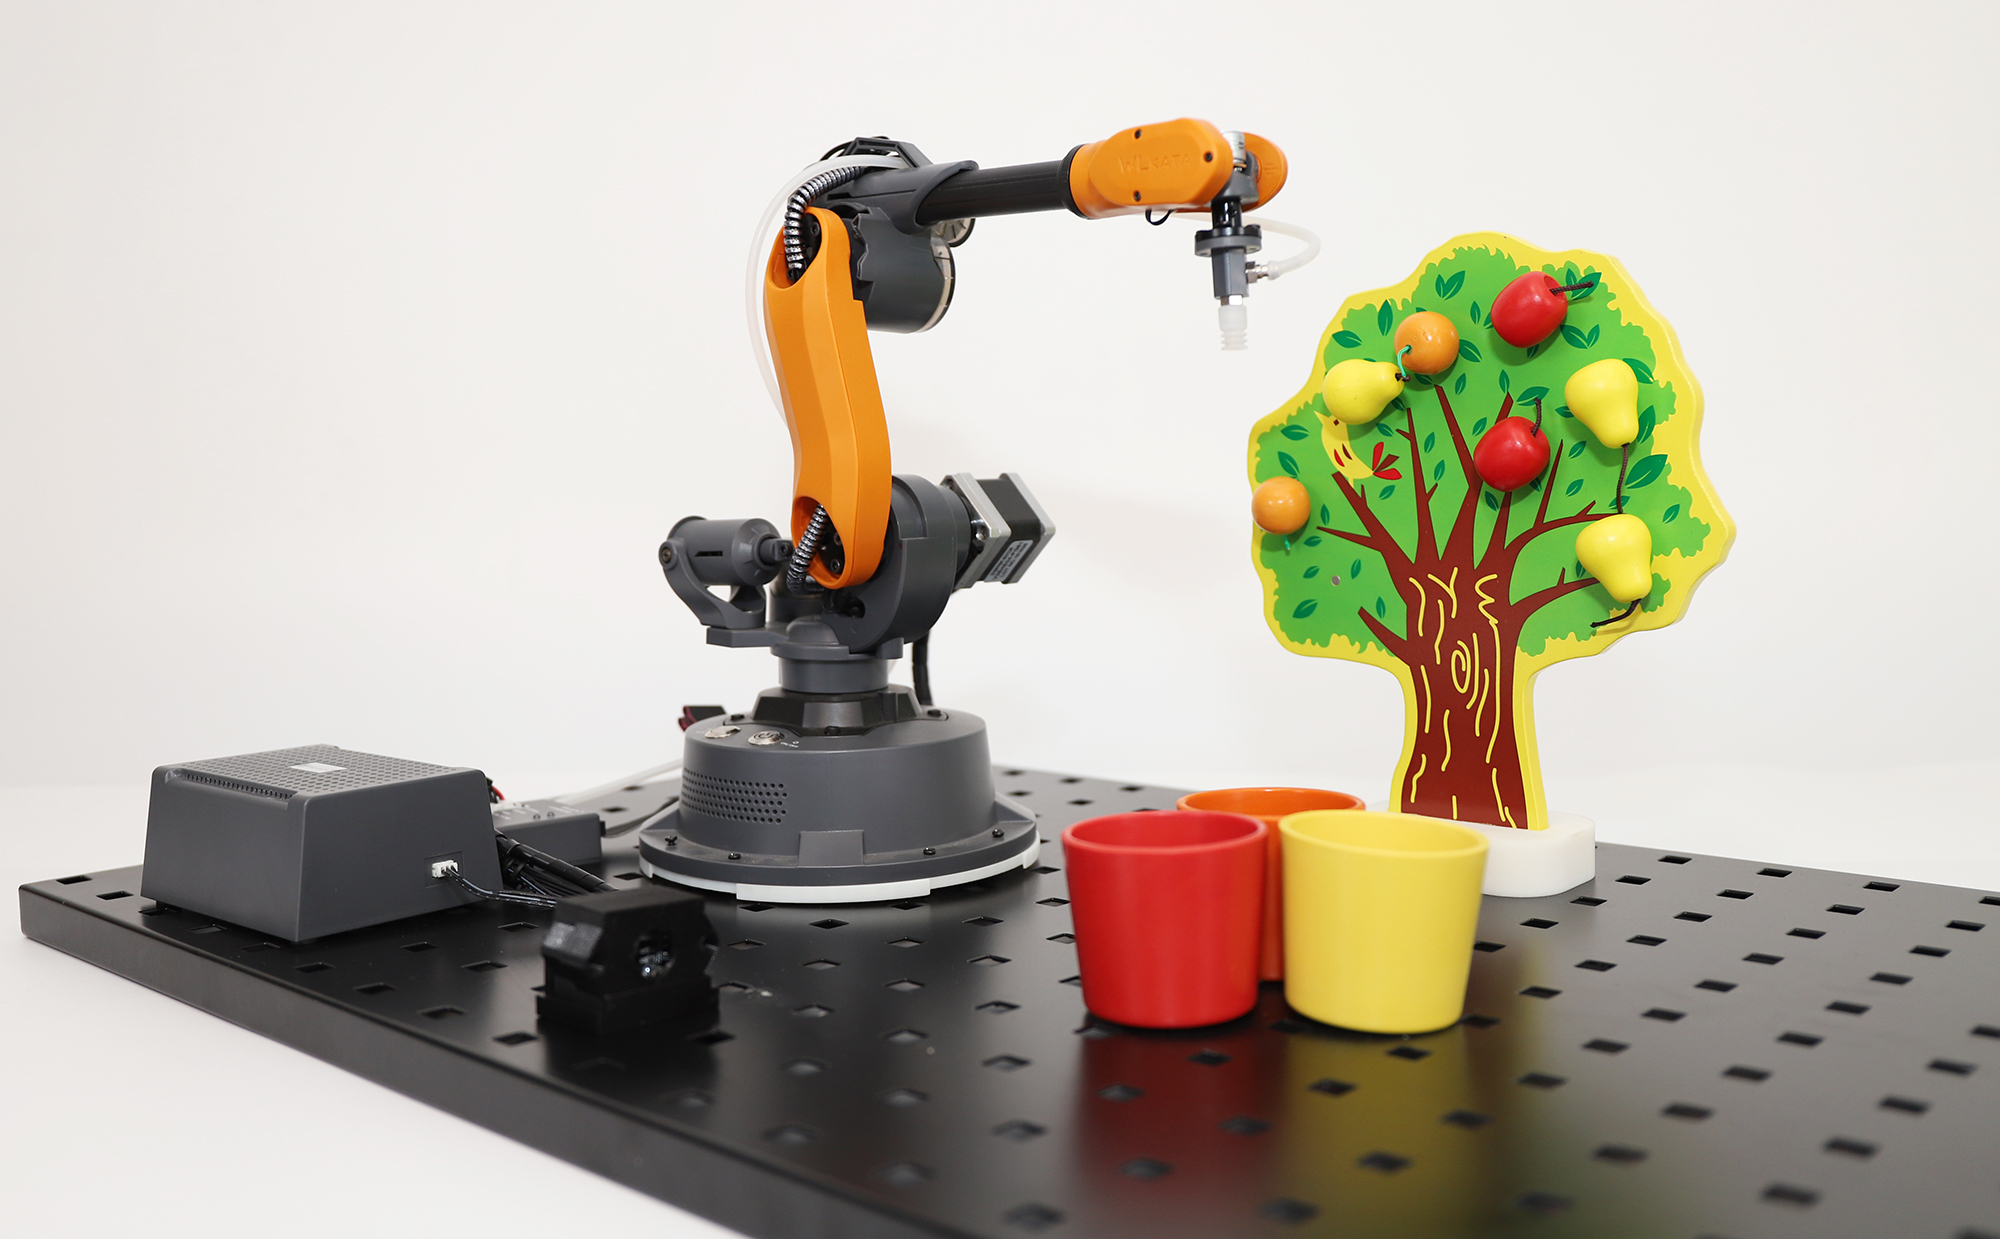 6-Axis Mini Industrial Robot For Education by Oz Robotics